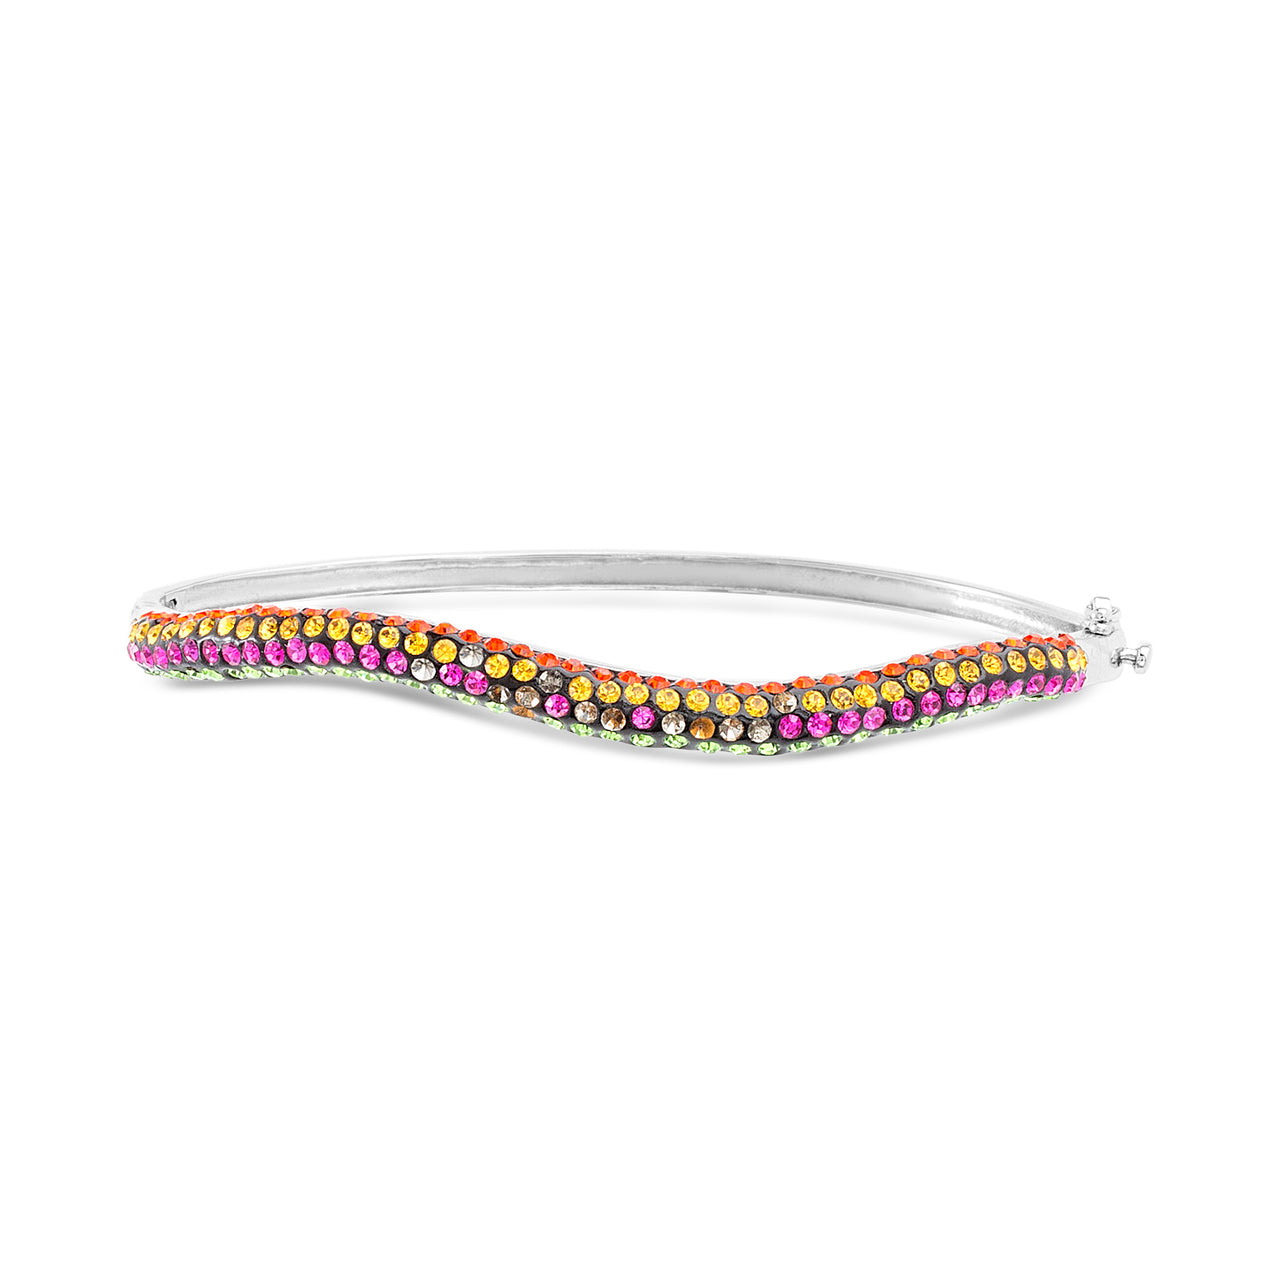 Lesa Michele Rainbow Crystal Wave Bangle in Rhodium Plated Sterling Silver